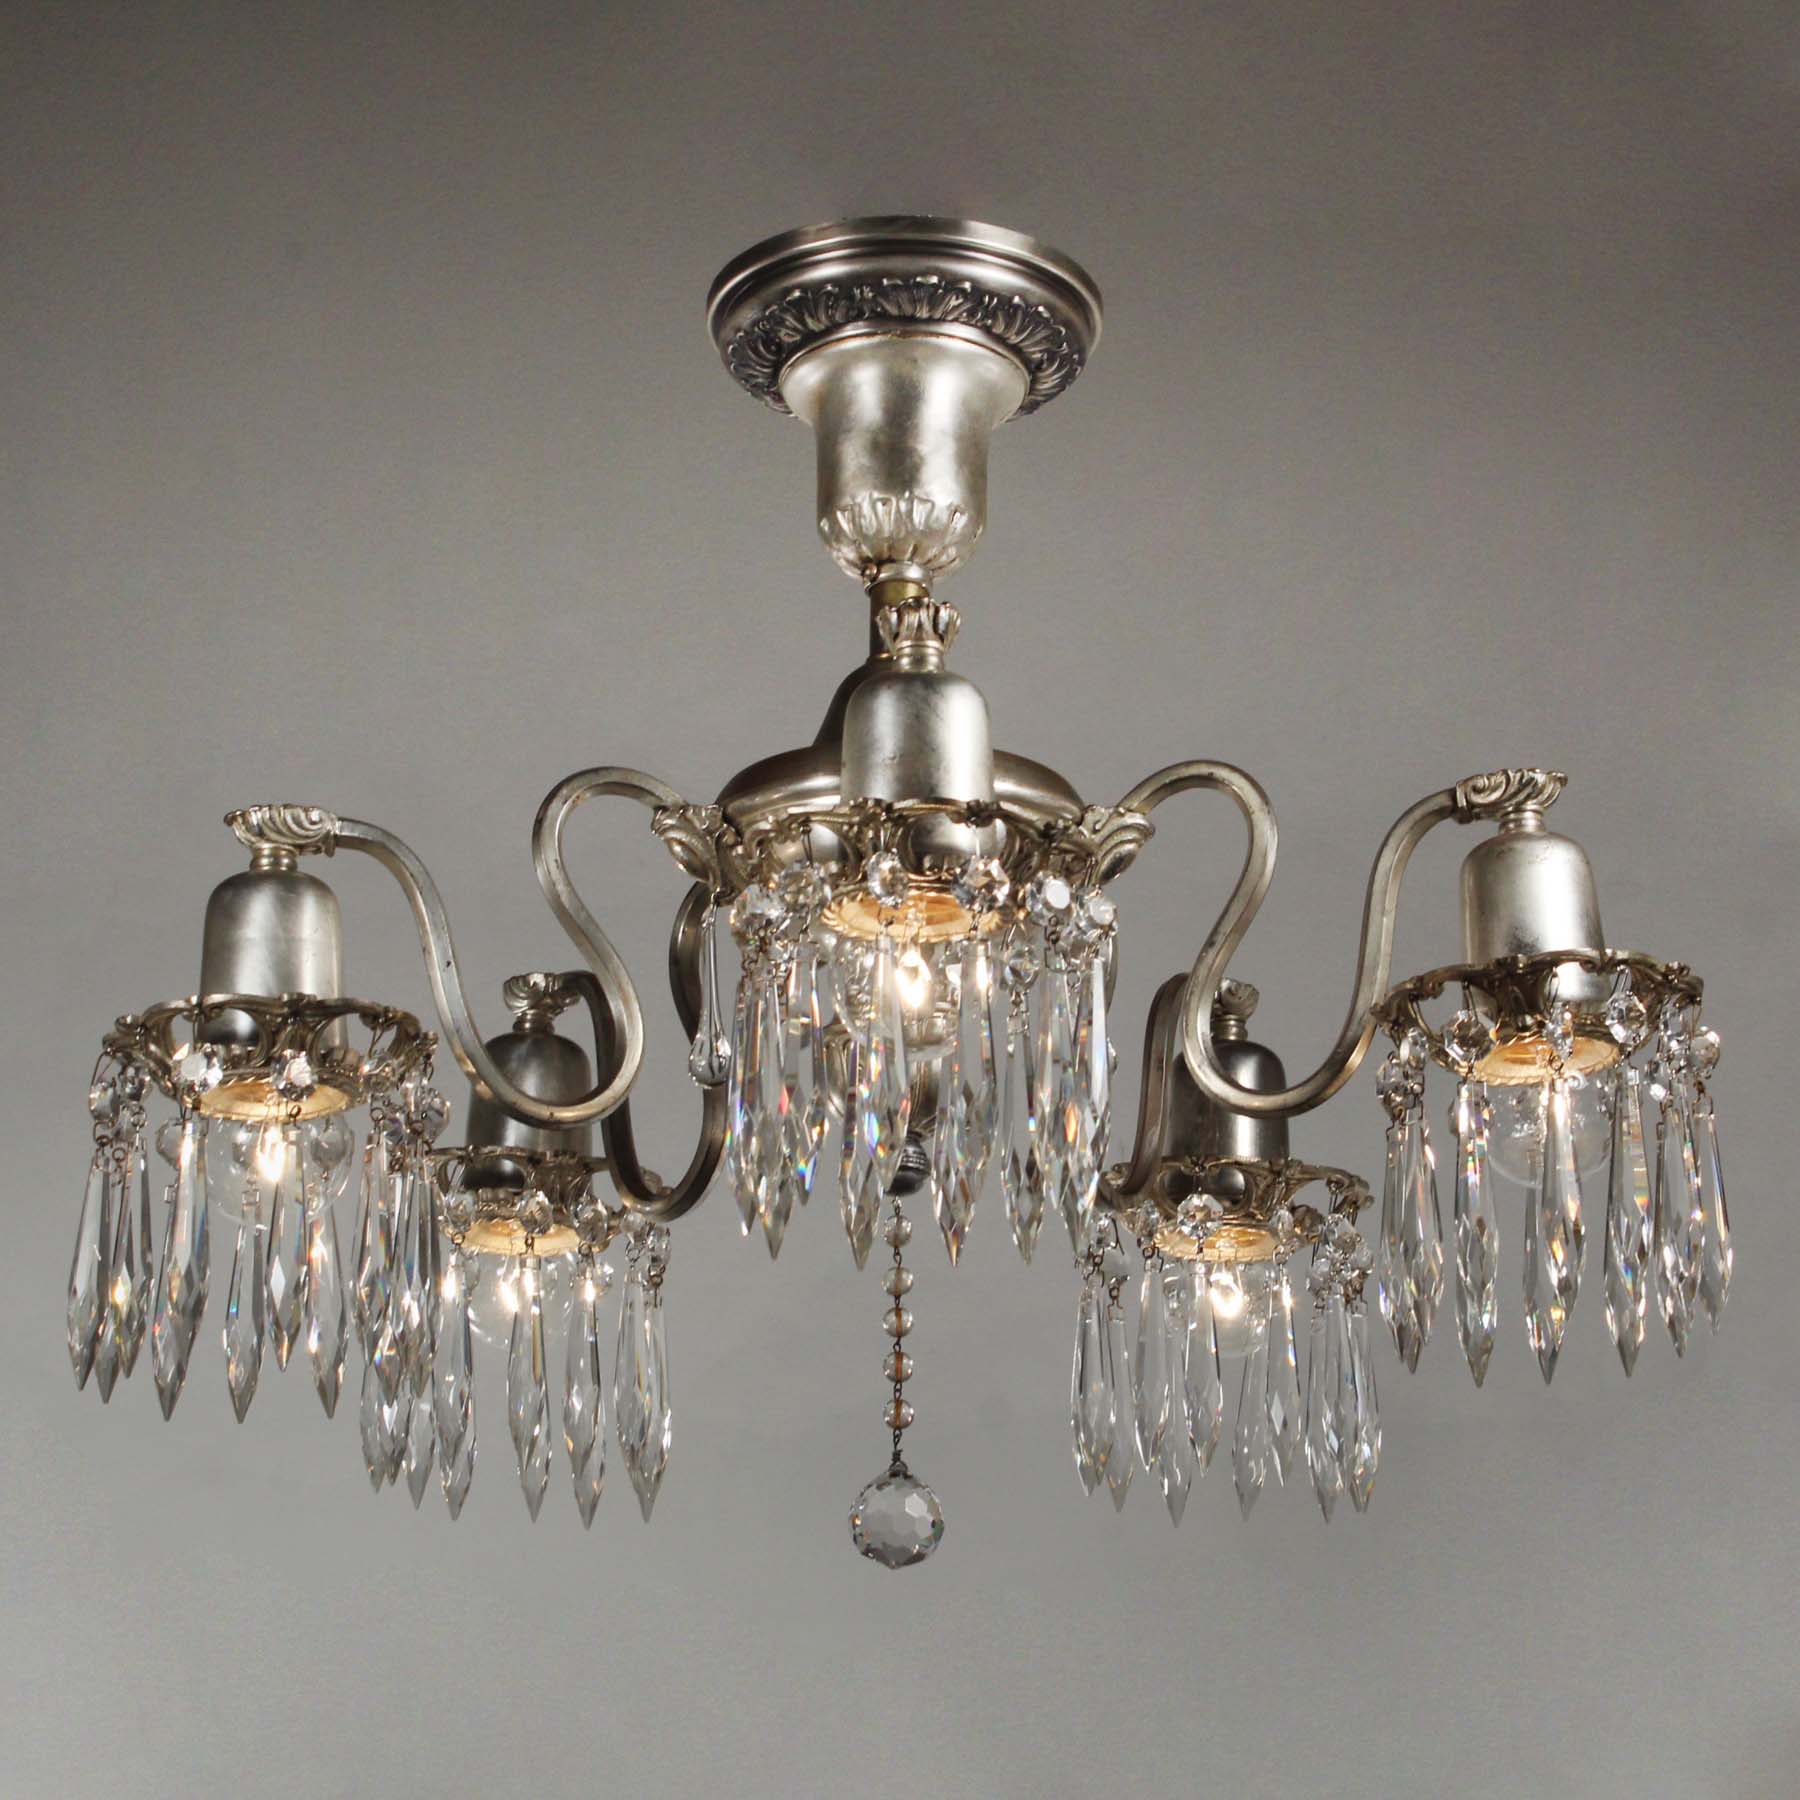 SOLD Antique Neoclassical Five-Light Semi-Flush Chandelier with Prisms, Silver Plate-67427